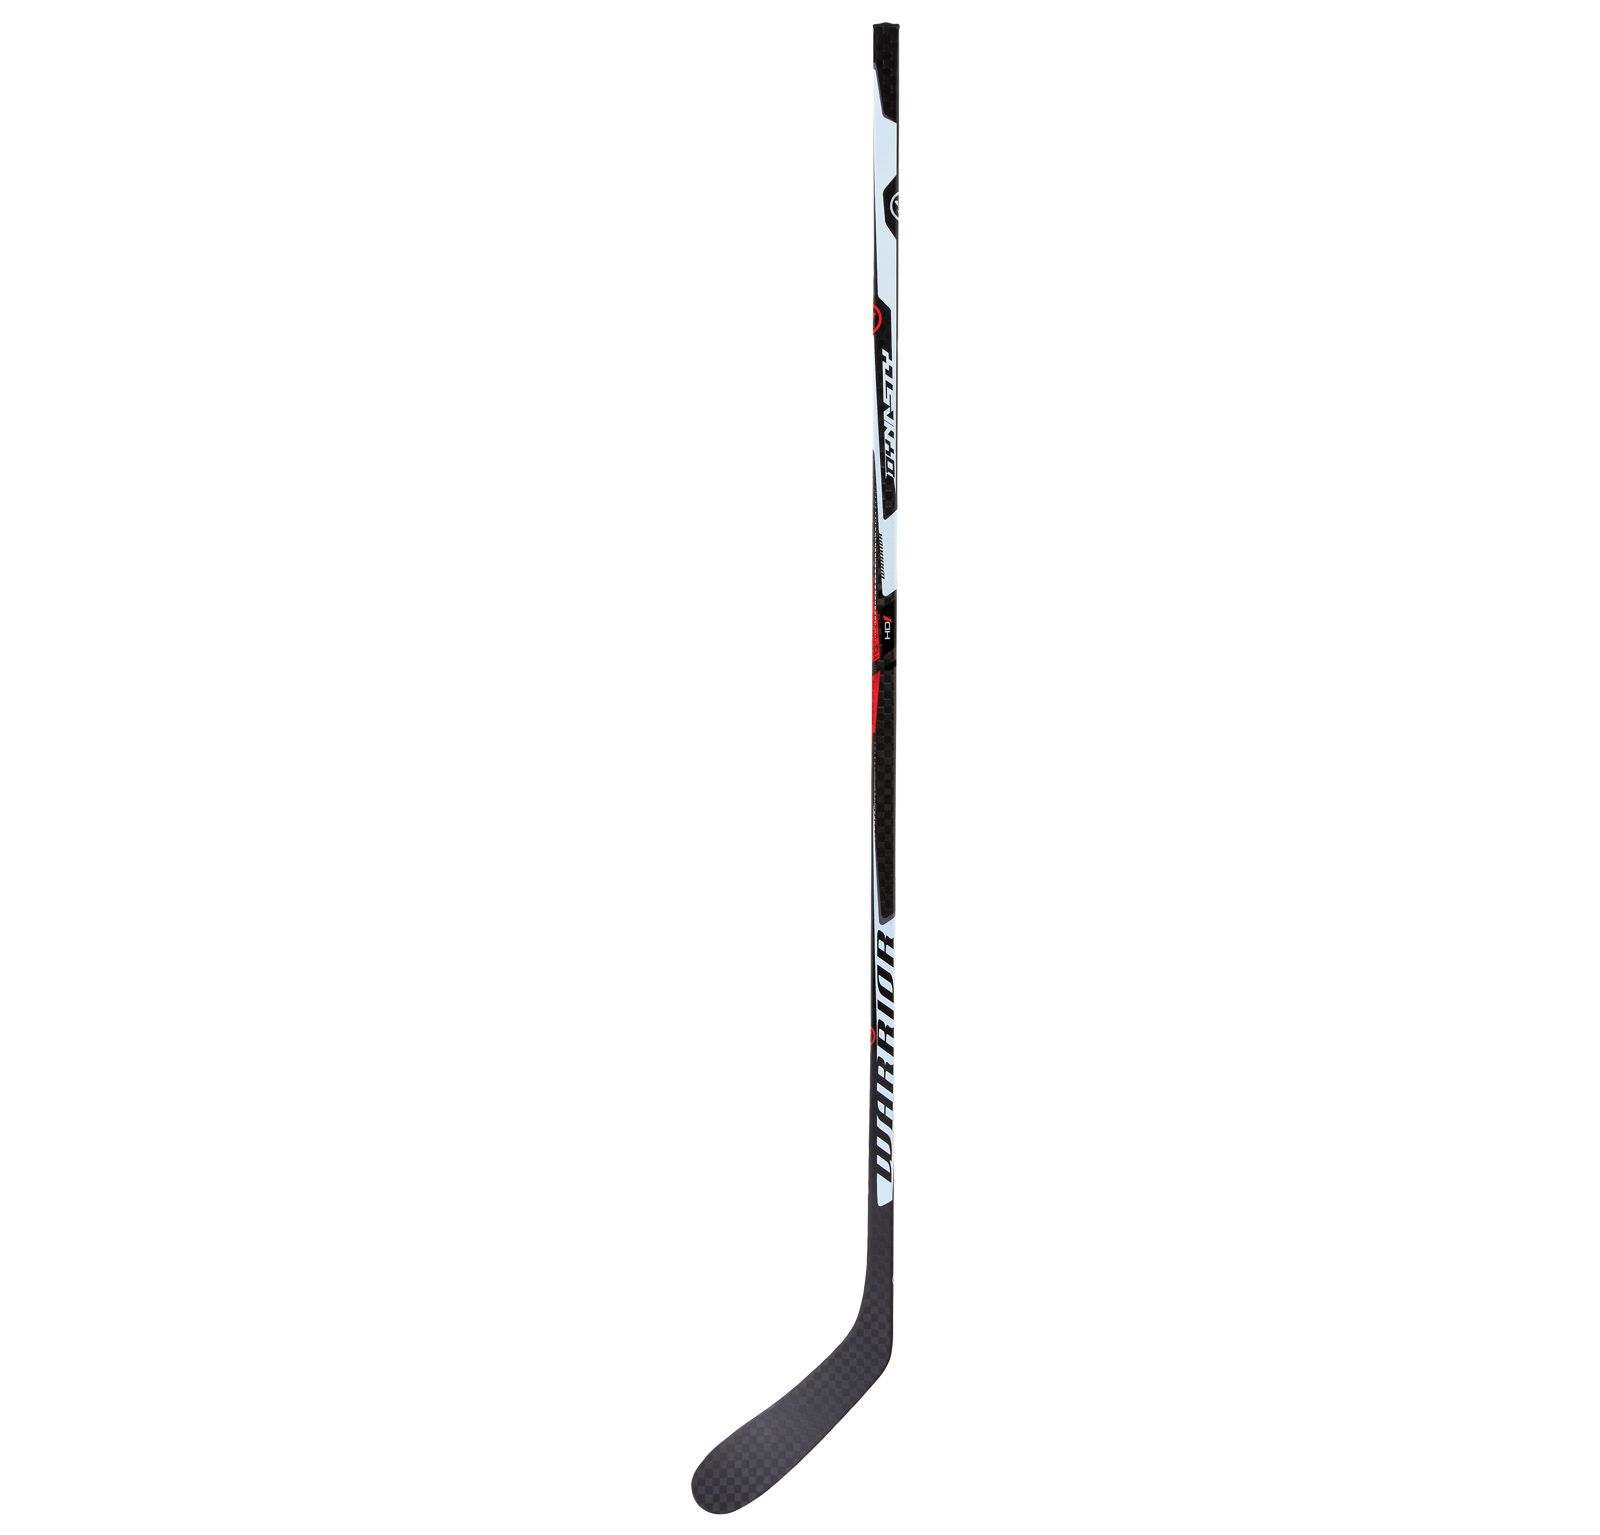 DYNASTY HD1 INTERMEDIATE GRIP HOCKEY STICK, Black with Red & White image number 0